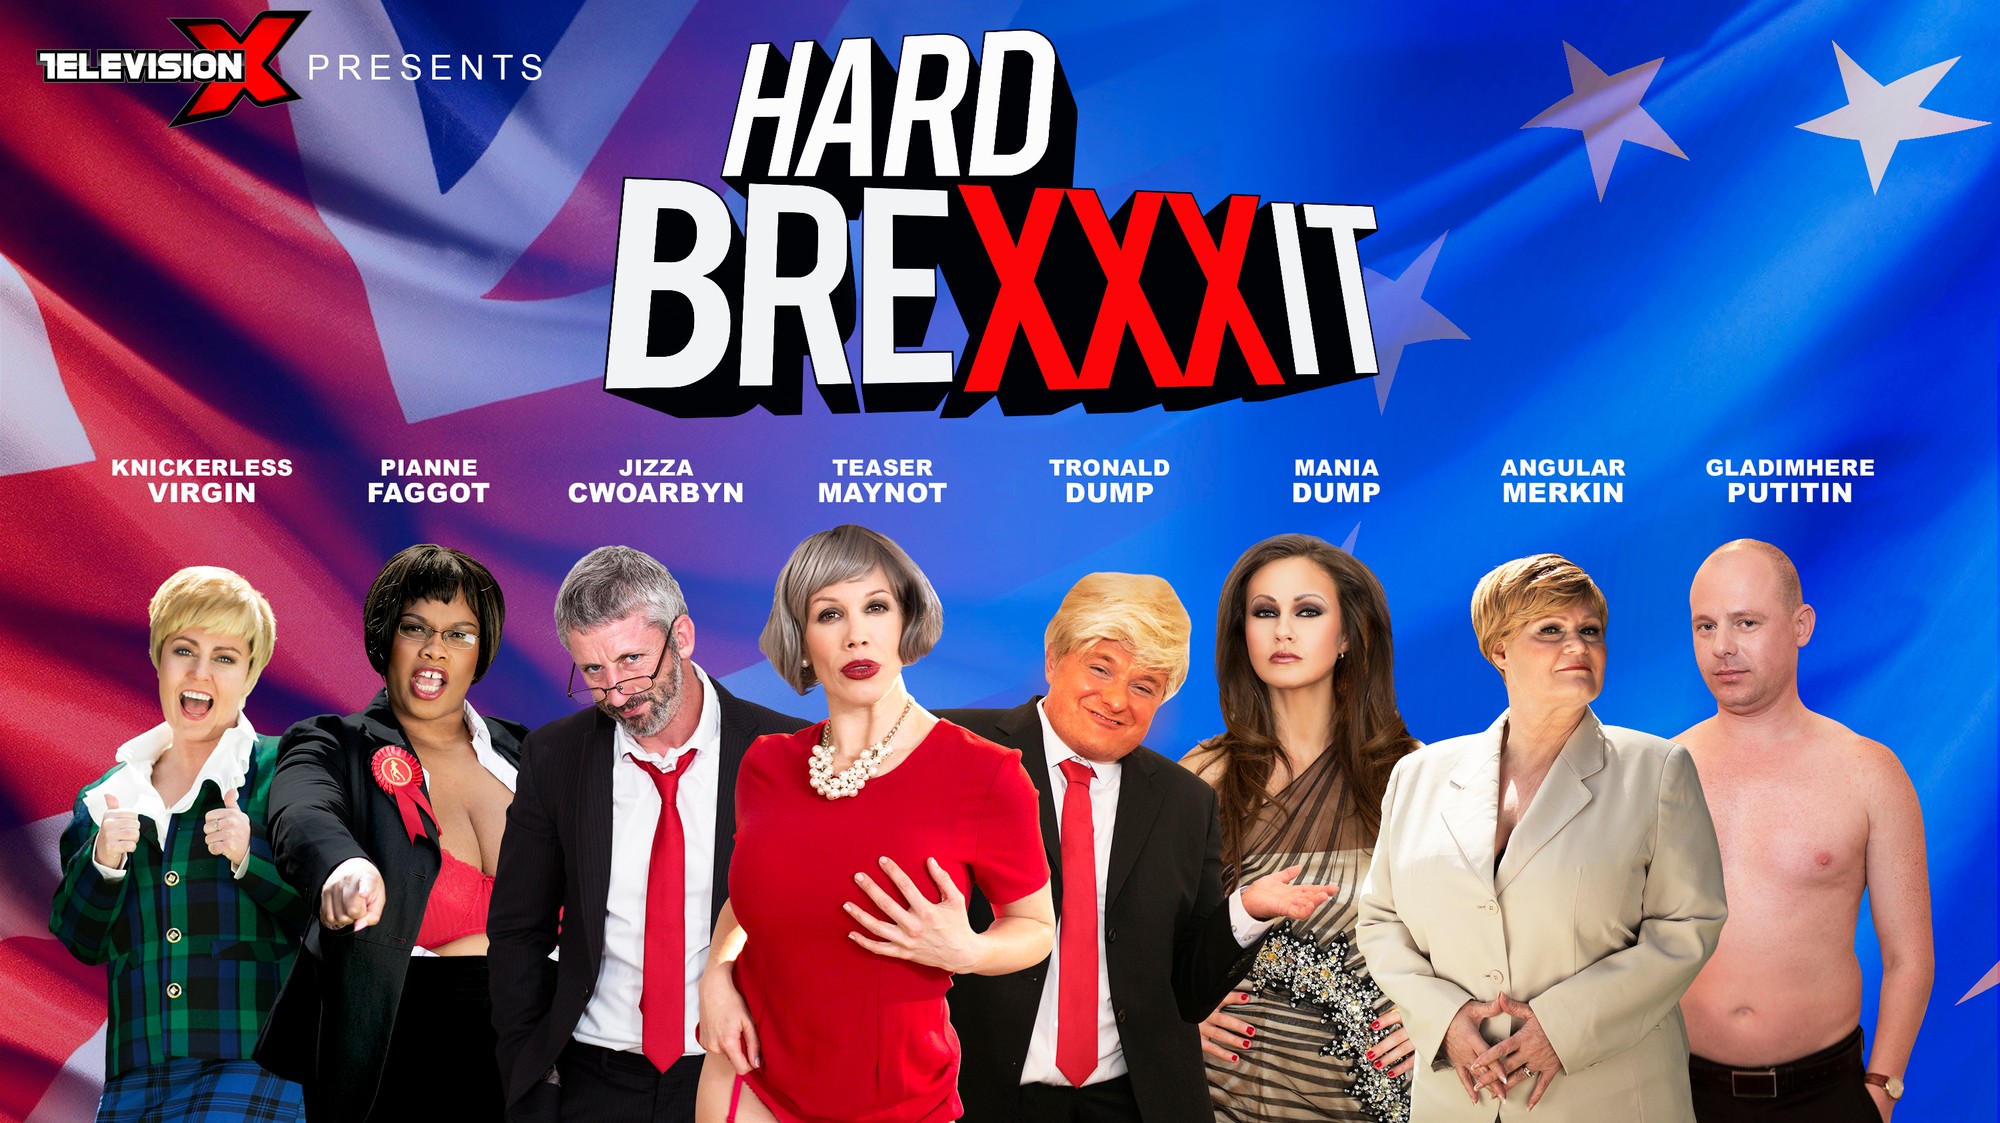 Brexit Britain Porn - This Brexit-Themed Porno Made Me Think Long and Hard About ...